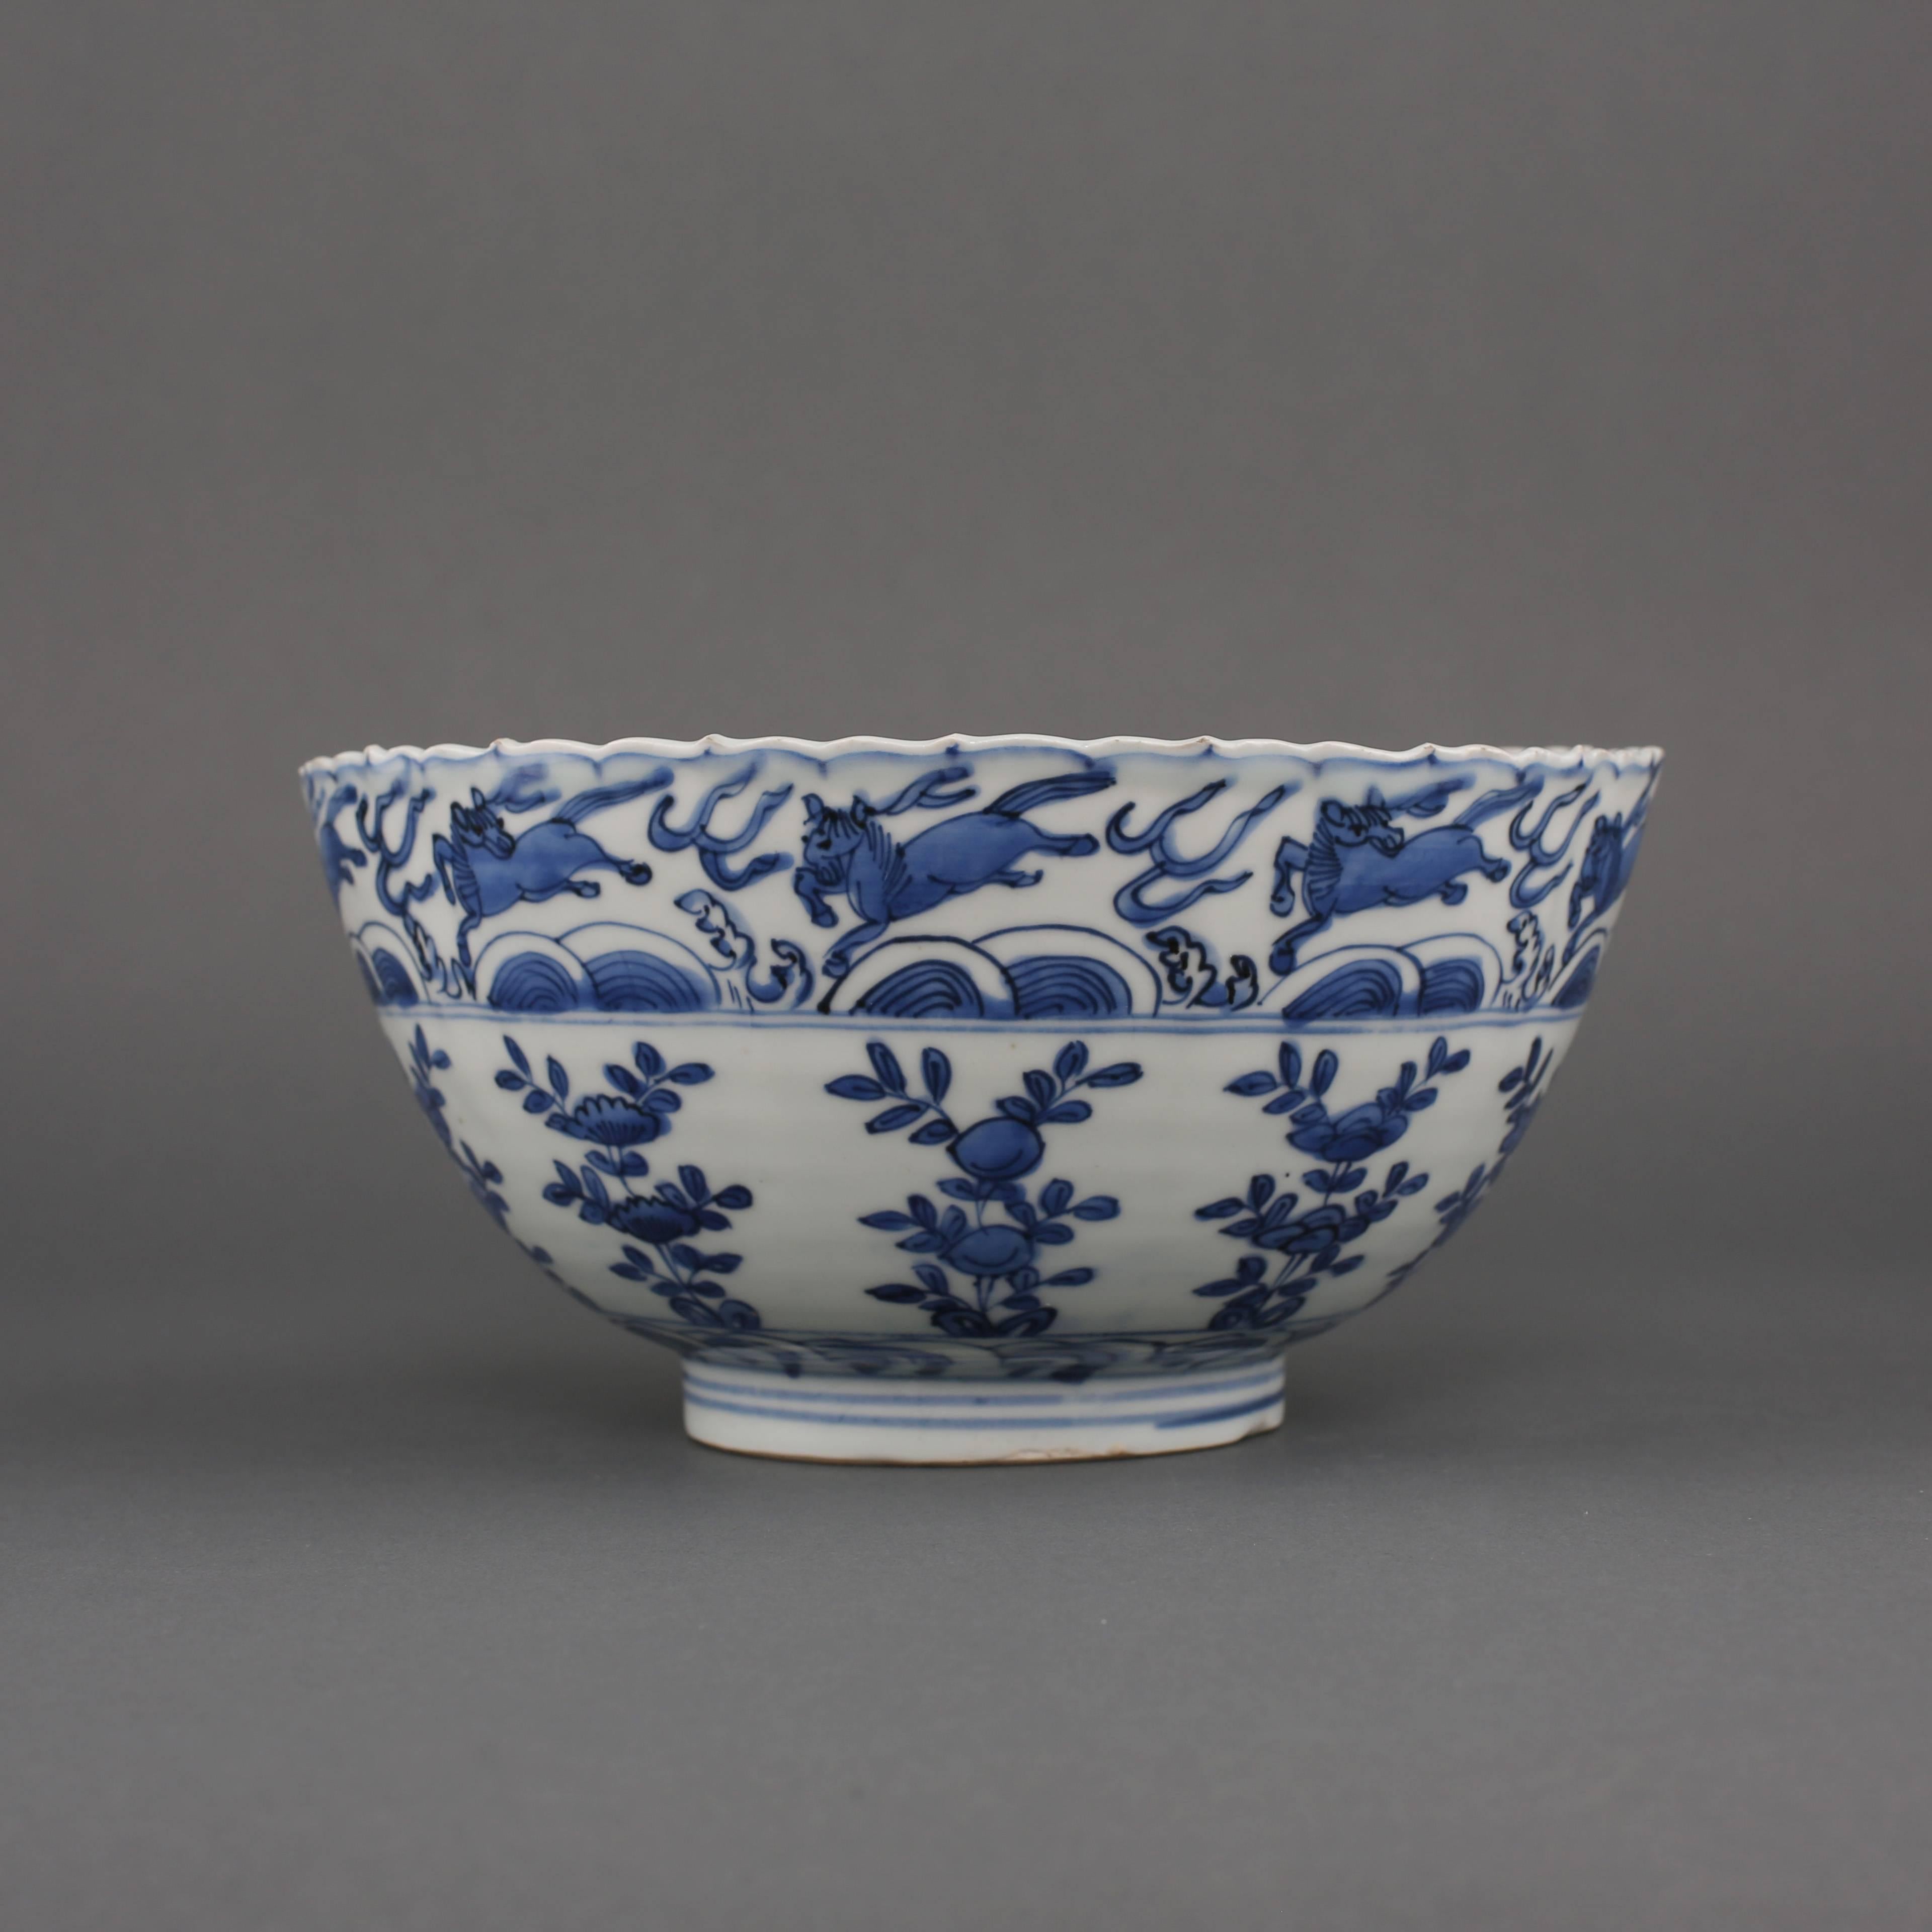 A Chinese Ming porcelain blue and white bowl with foliate rim painted with a wide band of horses jumping over waves, above ten upright alternating flowering and fruiting branches, between a continuous wave border at the base, the interior with a